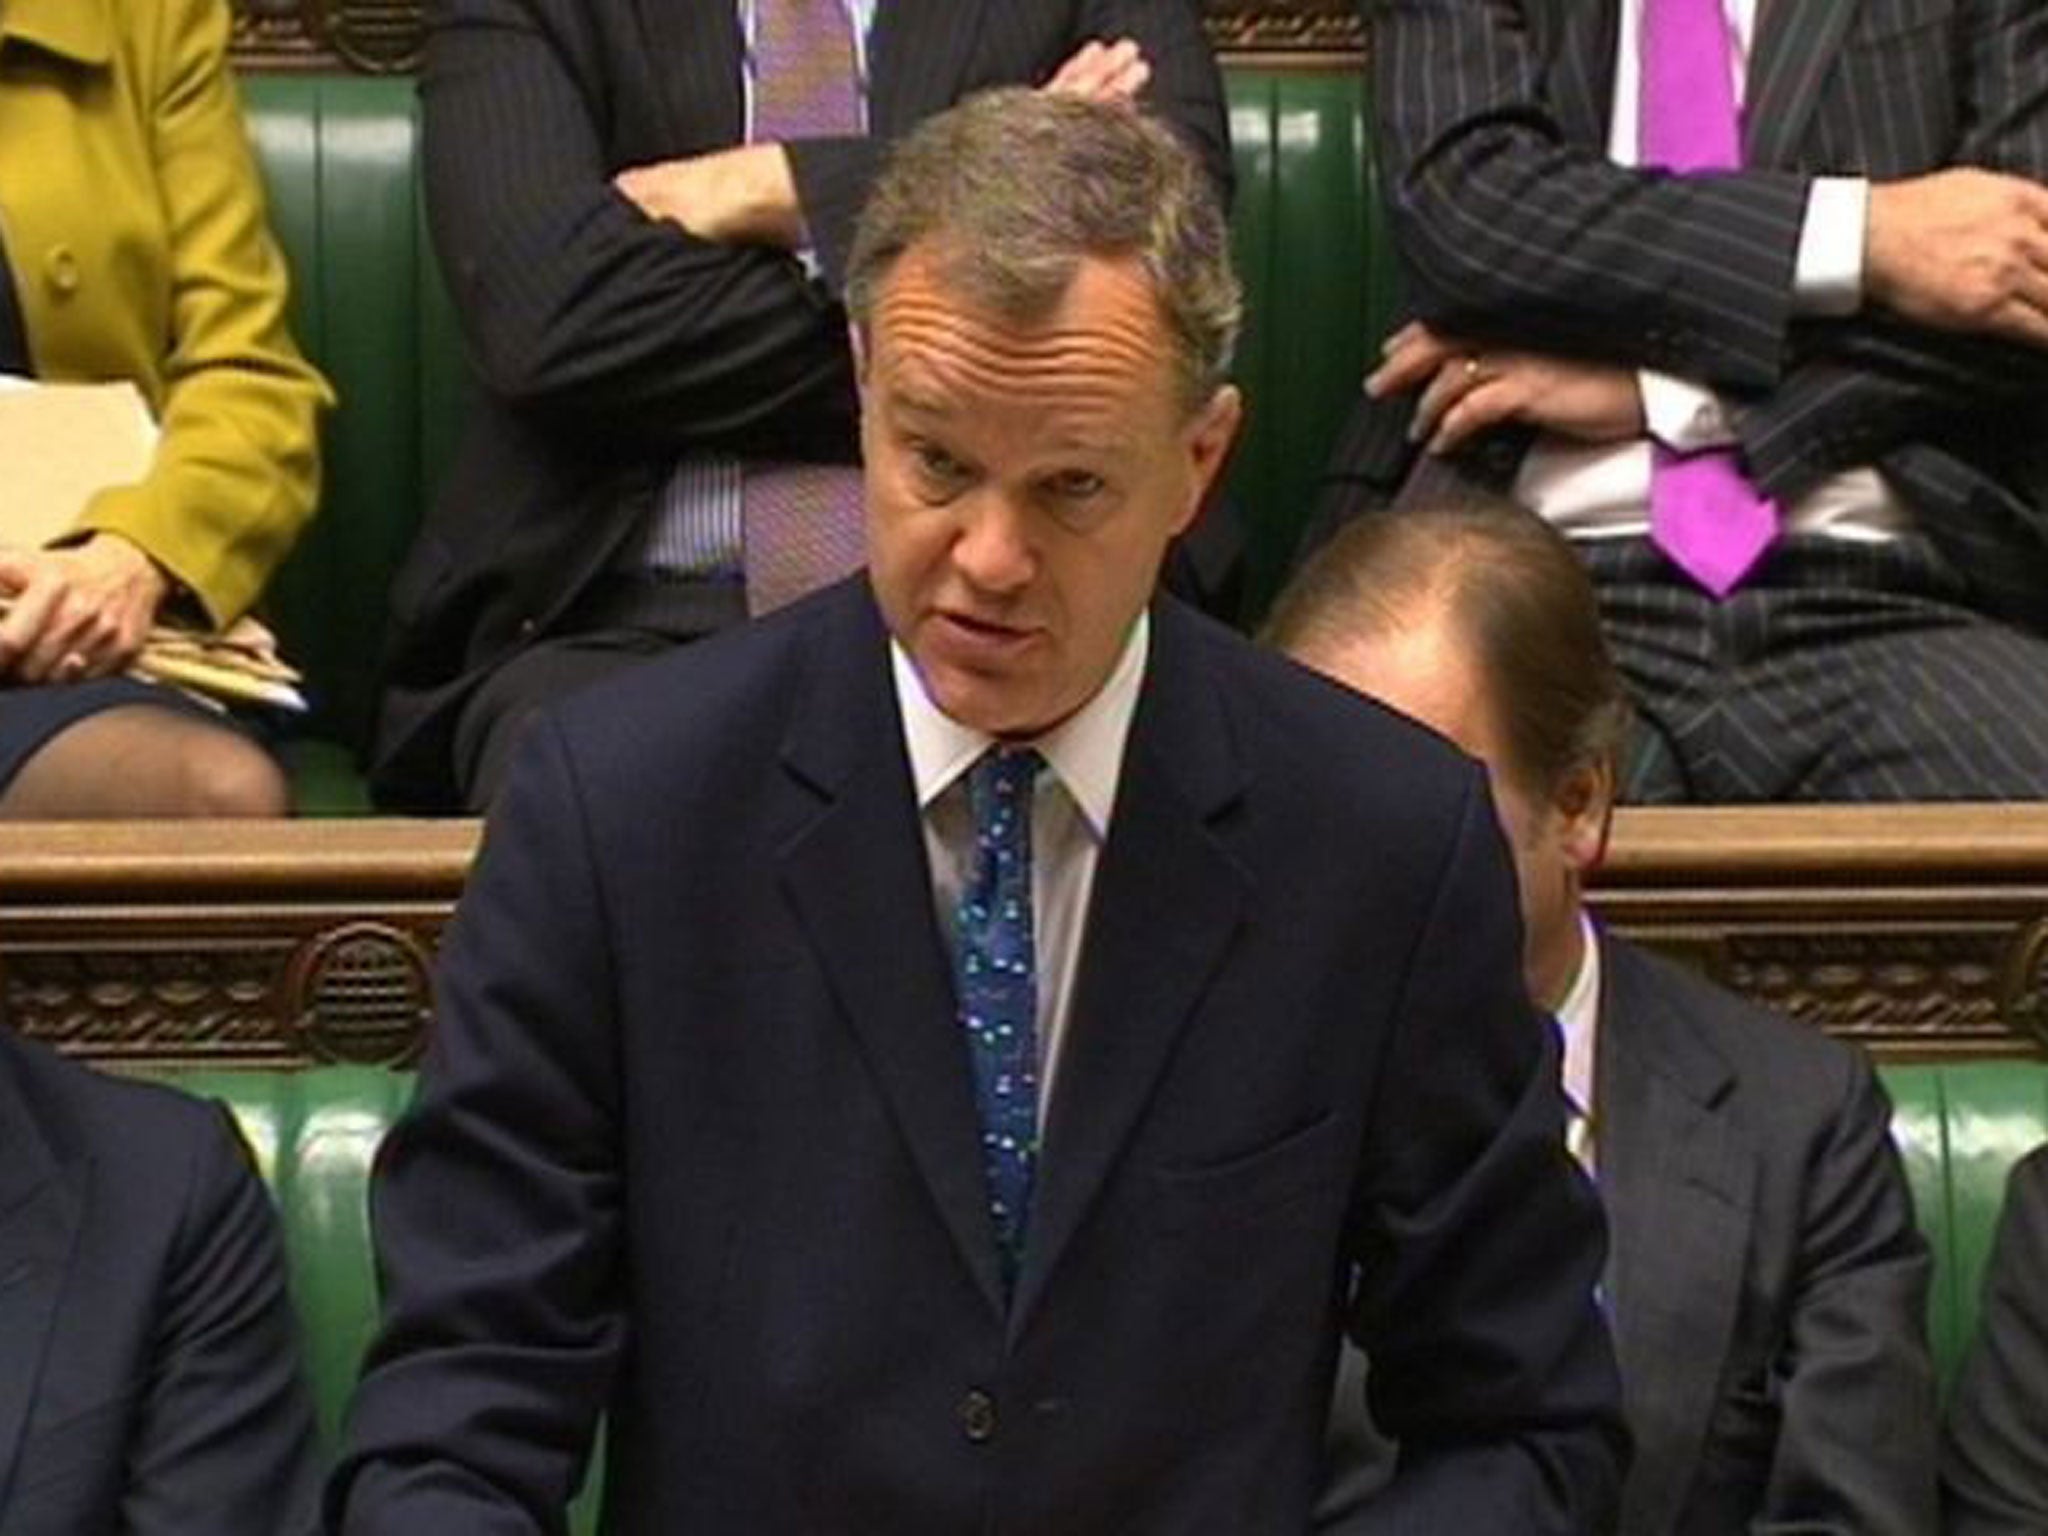 Foreign Office minister Mark Simmonds who has resigned from the Government and will stand down as MP for Boston and Skegness at next year's General Election